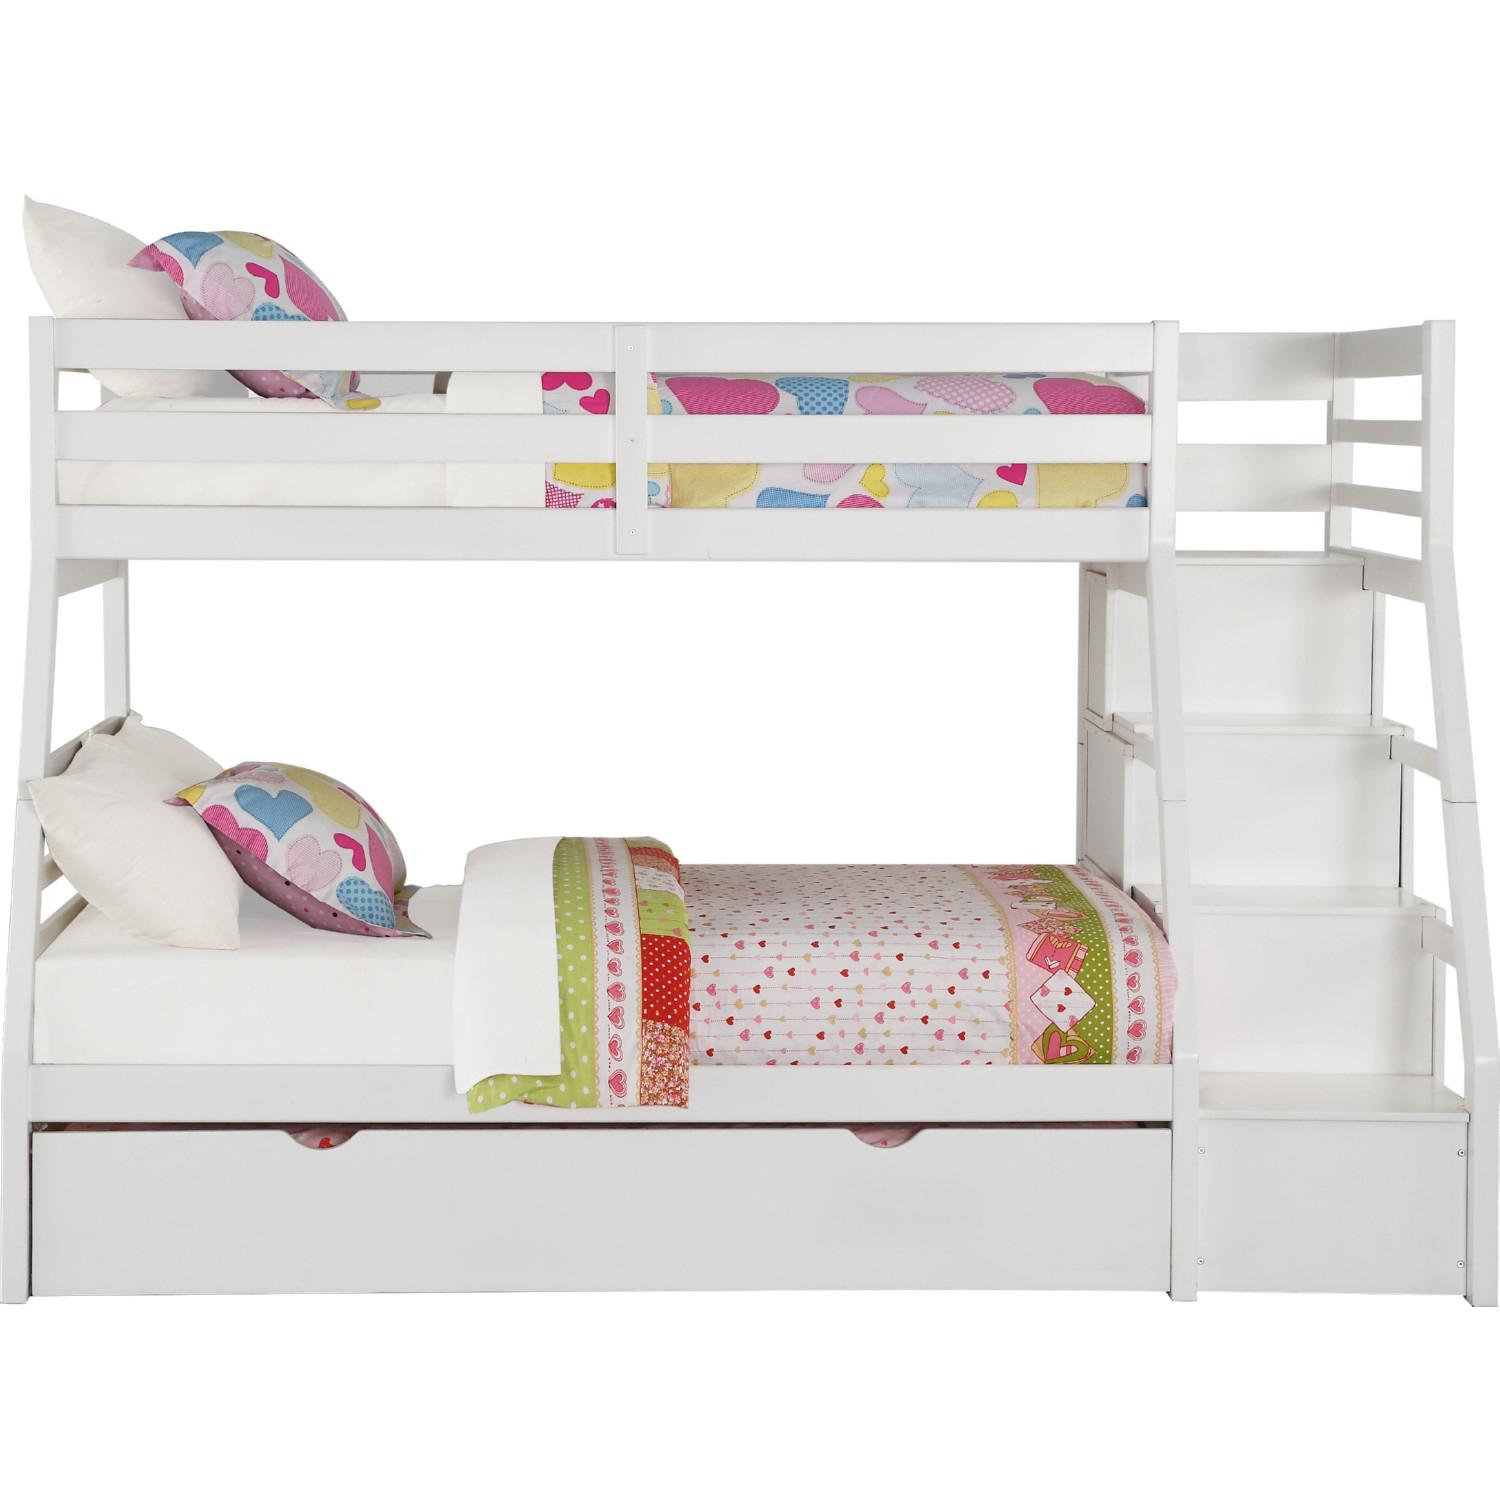 

    
Transitional White Twin/Full Bunk Bed by Acme Jason 37105
